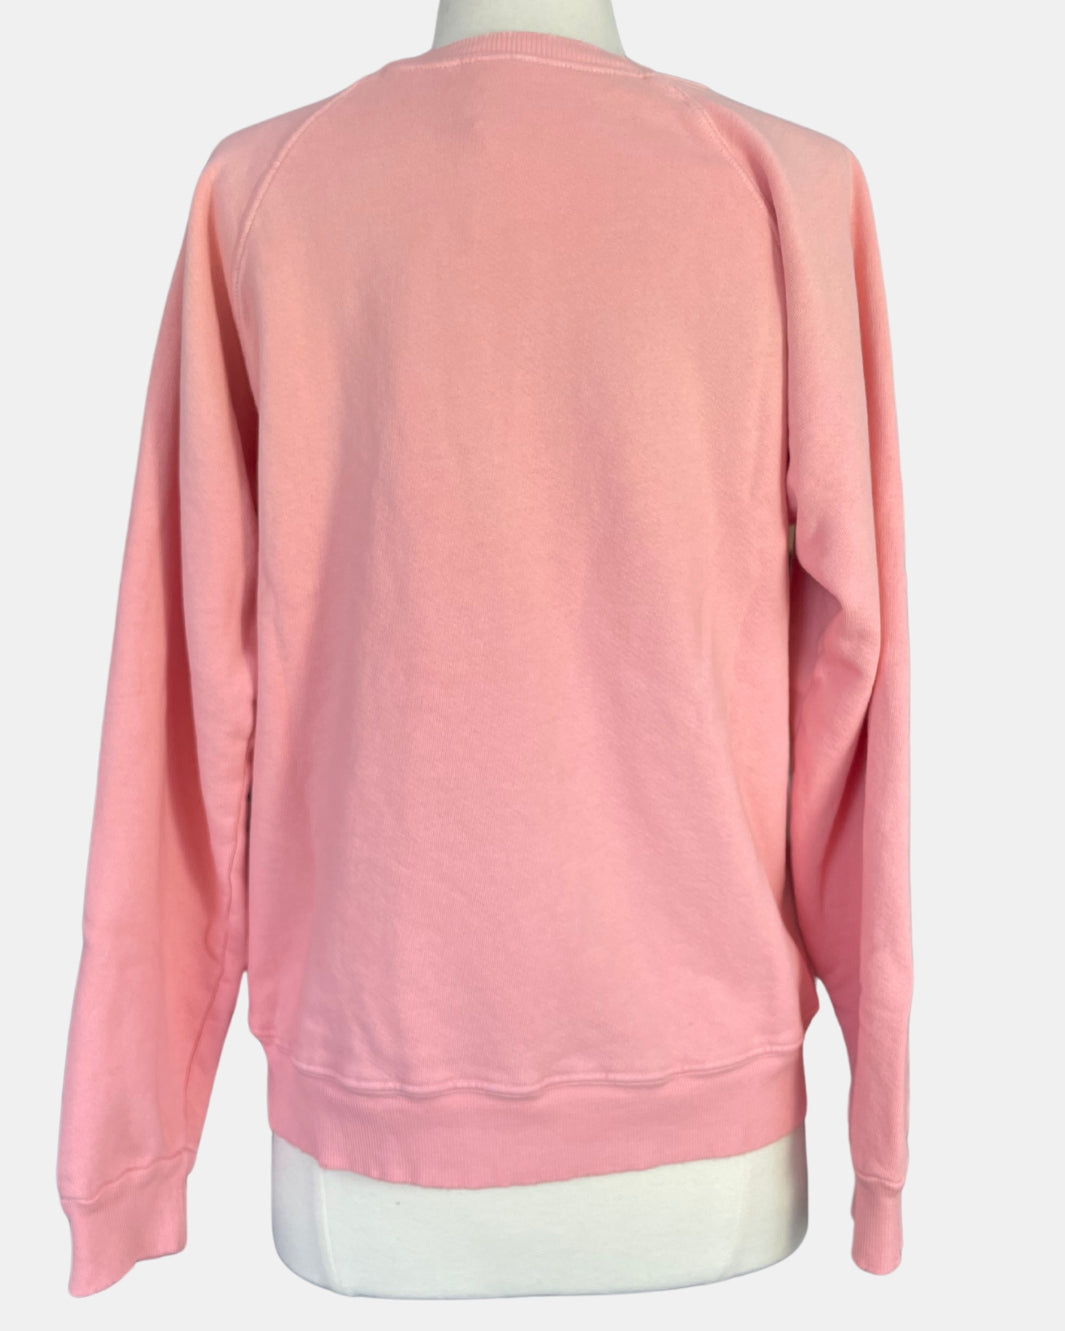 MOM EMBROIDERED CREWNECK IN DUSTY ROSE - Romi Boutique